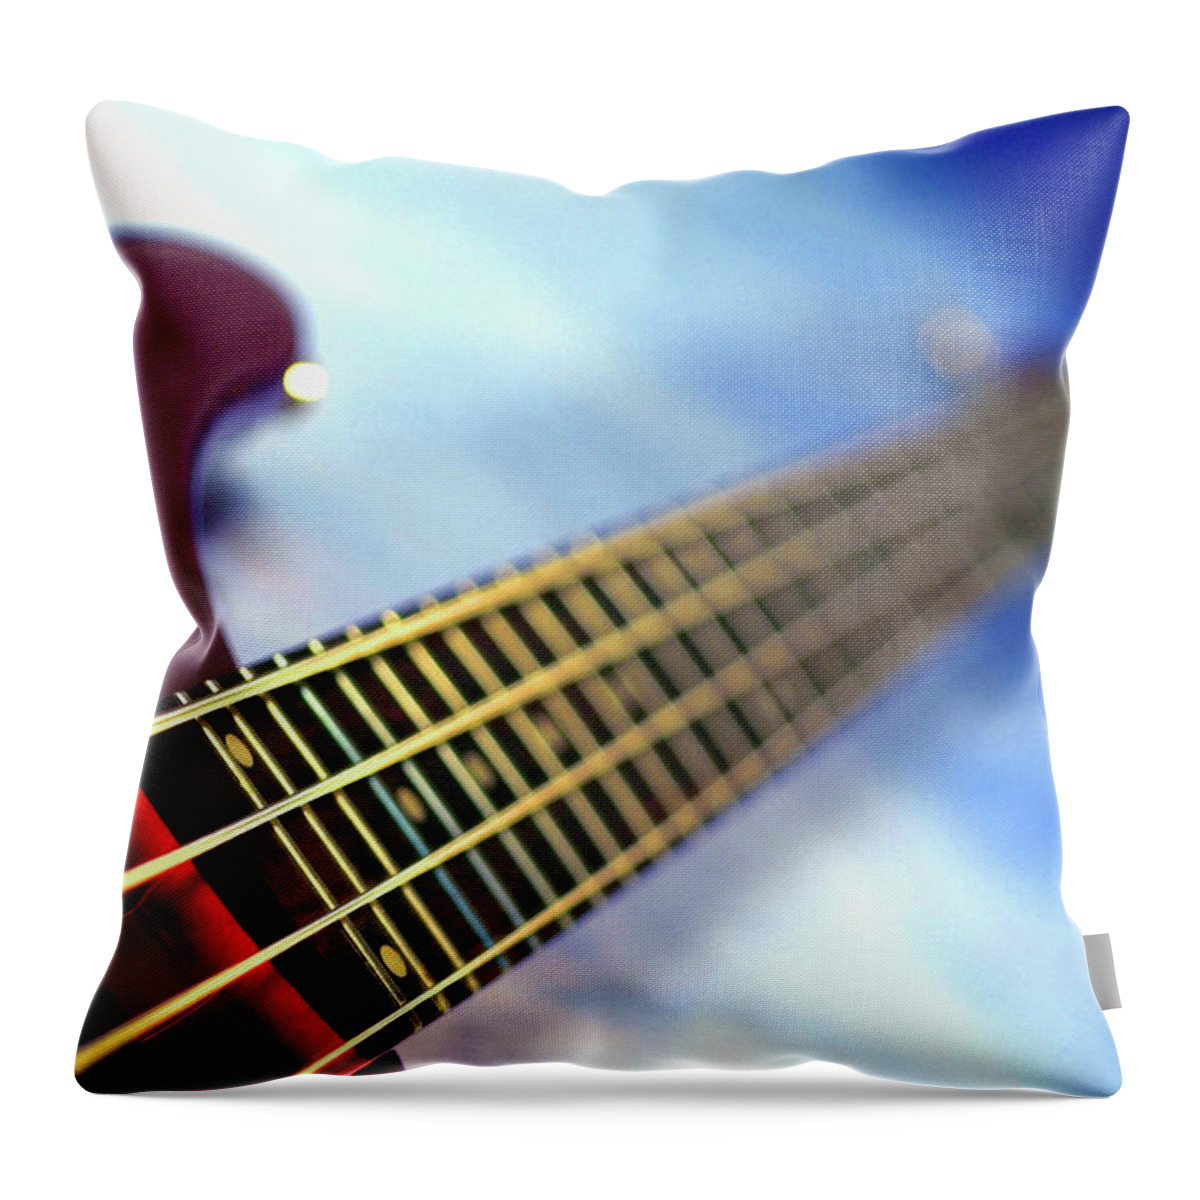 Music Throw Pillow featuring the photograph Electric Guitar And Sheet Music by Medioimages/photodisc